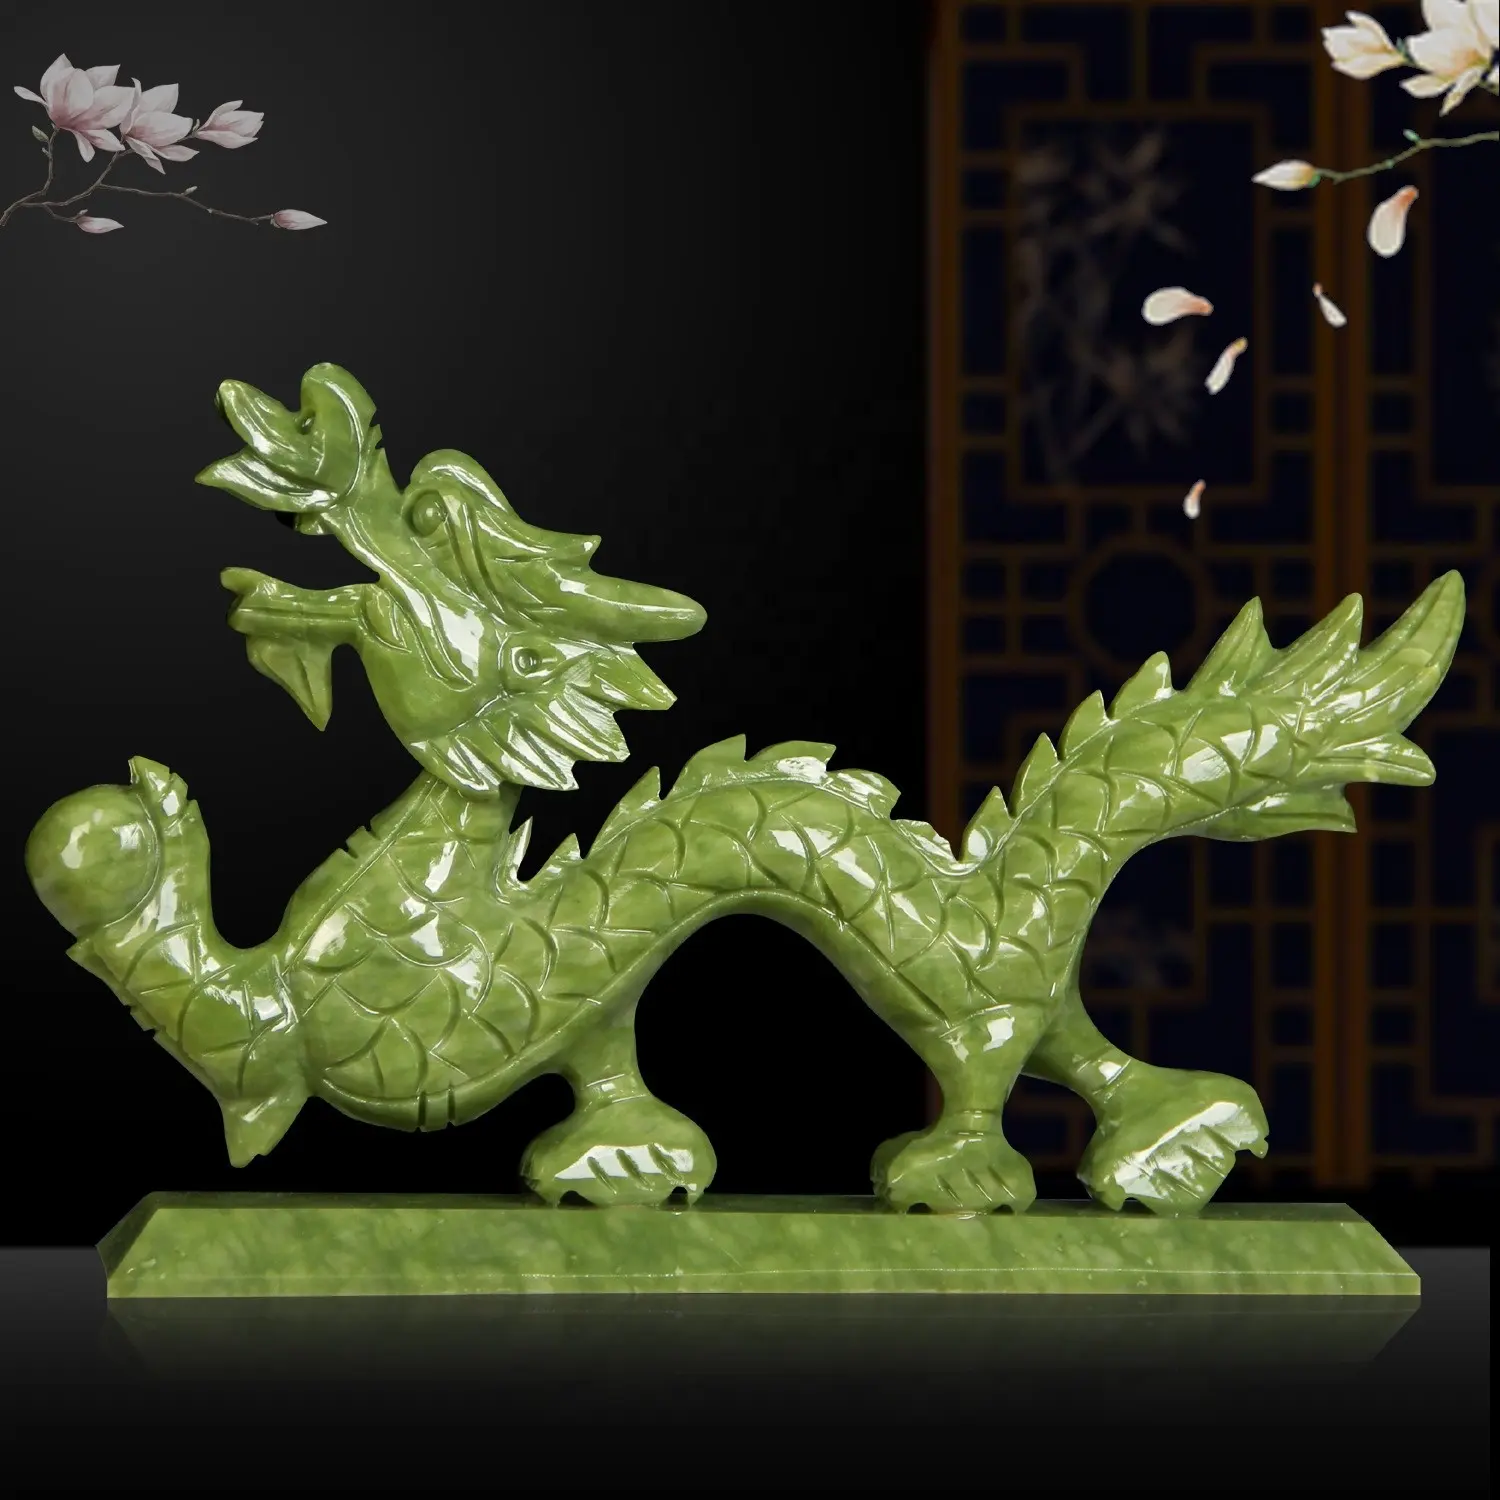 Chinese Feng Shui Dragon Play Bead Statue Natural Jade Dragon Sculpture for Home Office Decorations Art Collection Ornament